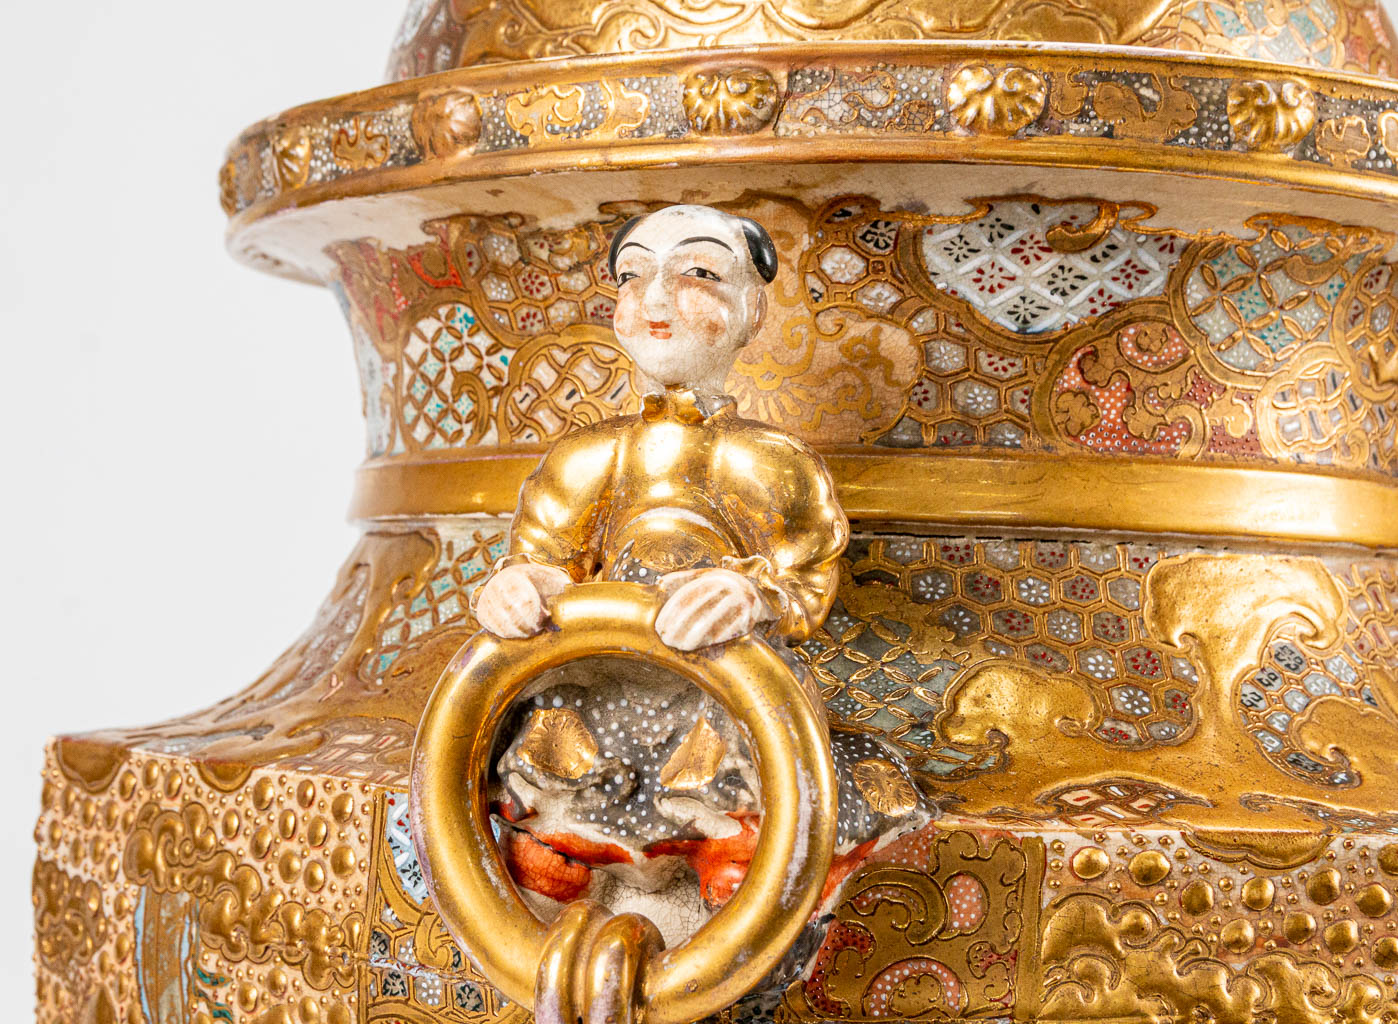 An exceptionally large Satsuma vase with lid on ceramic base, Emperor decor, Japan 19th century. (28 - Image 20 of 28